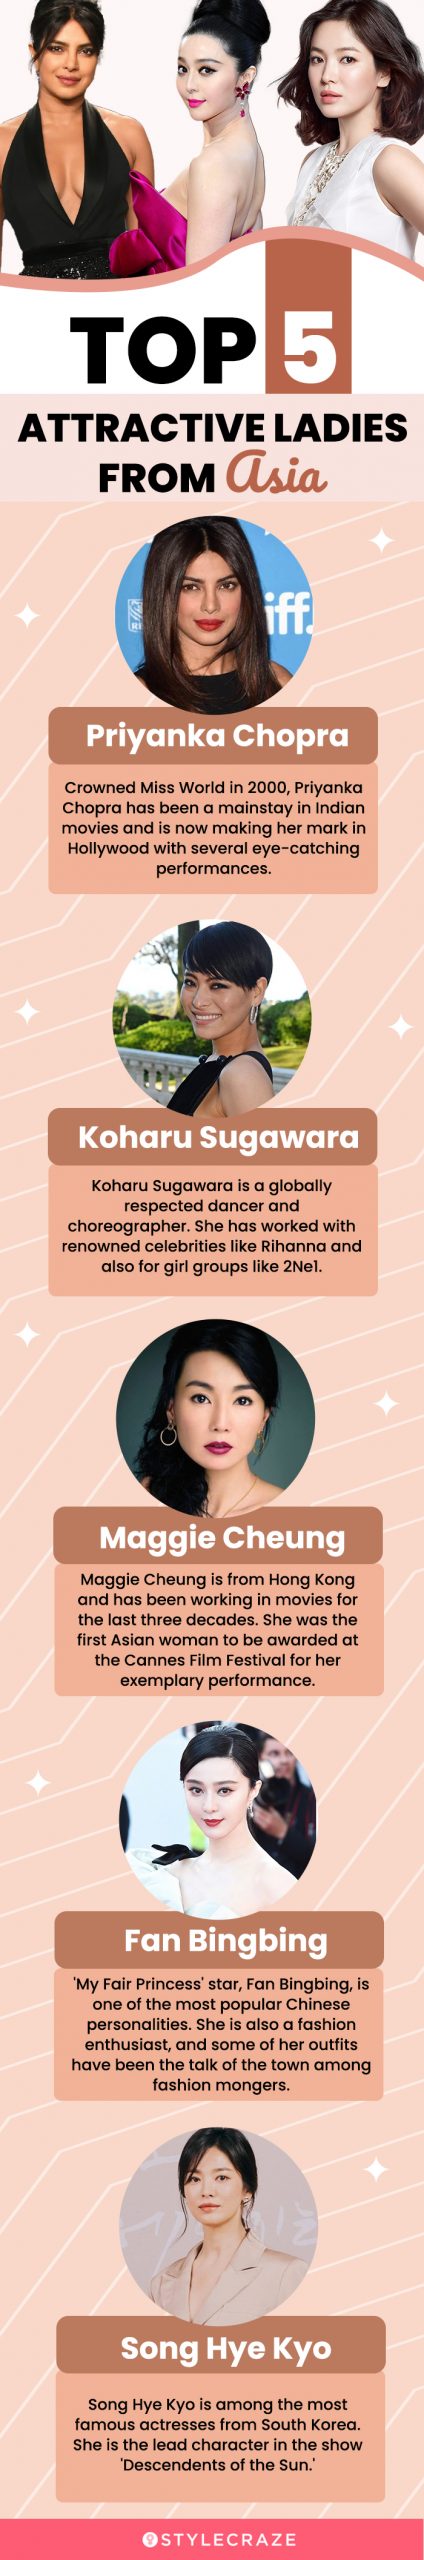 top 5 attractive ladies from asia (infographic)